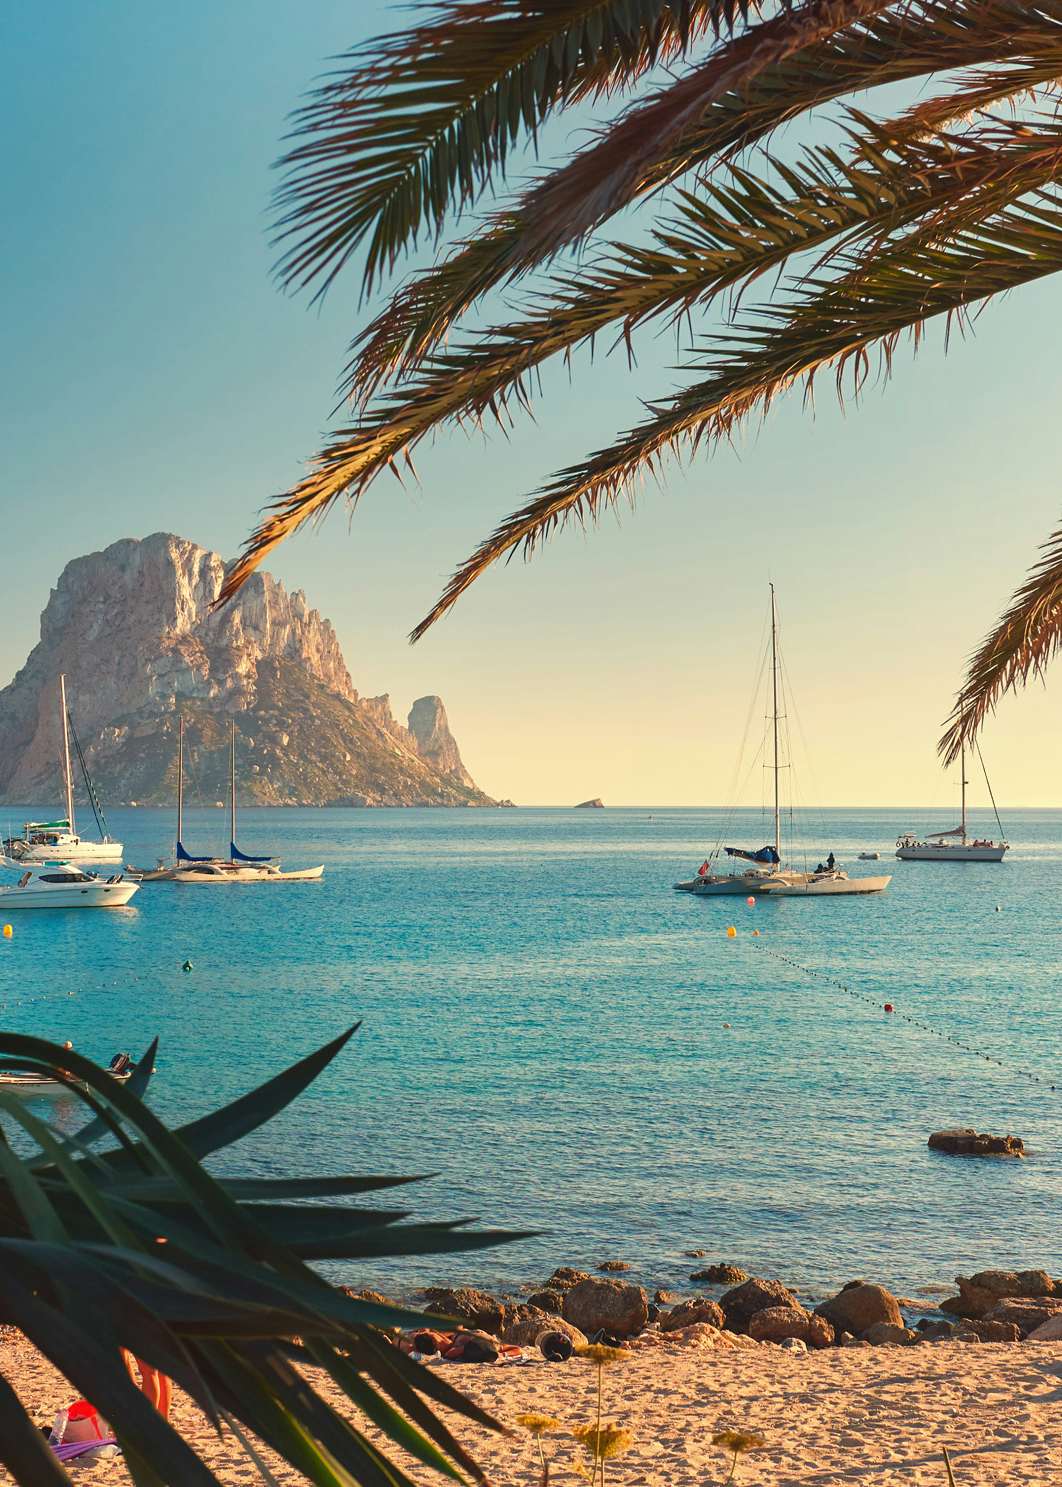 Palm fronds frame a serene view of anchored yachts near the mystical rock of Es Vedrà, off the coast of Ibiza.